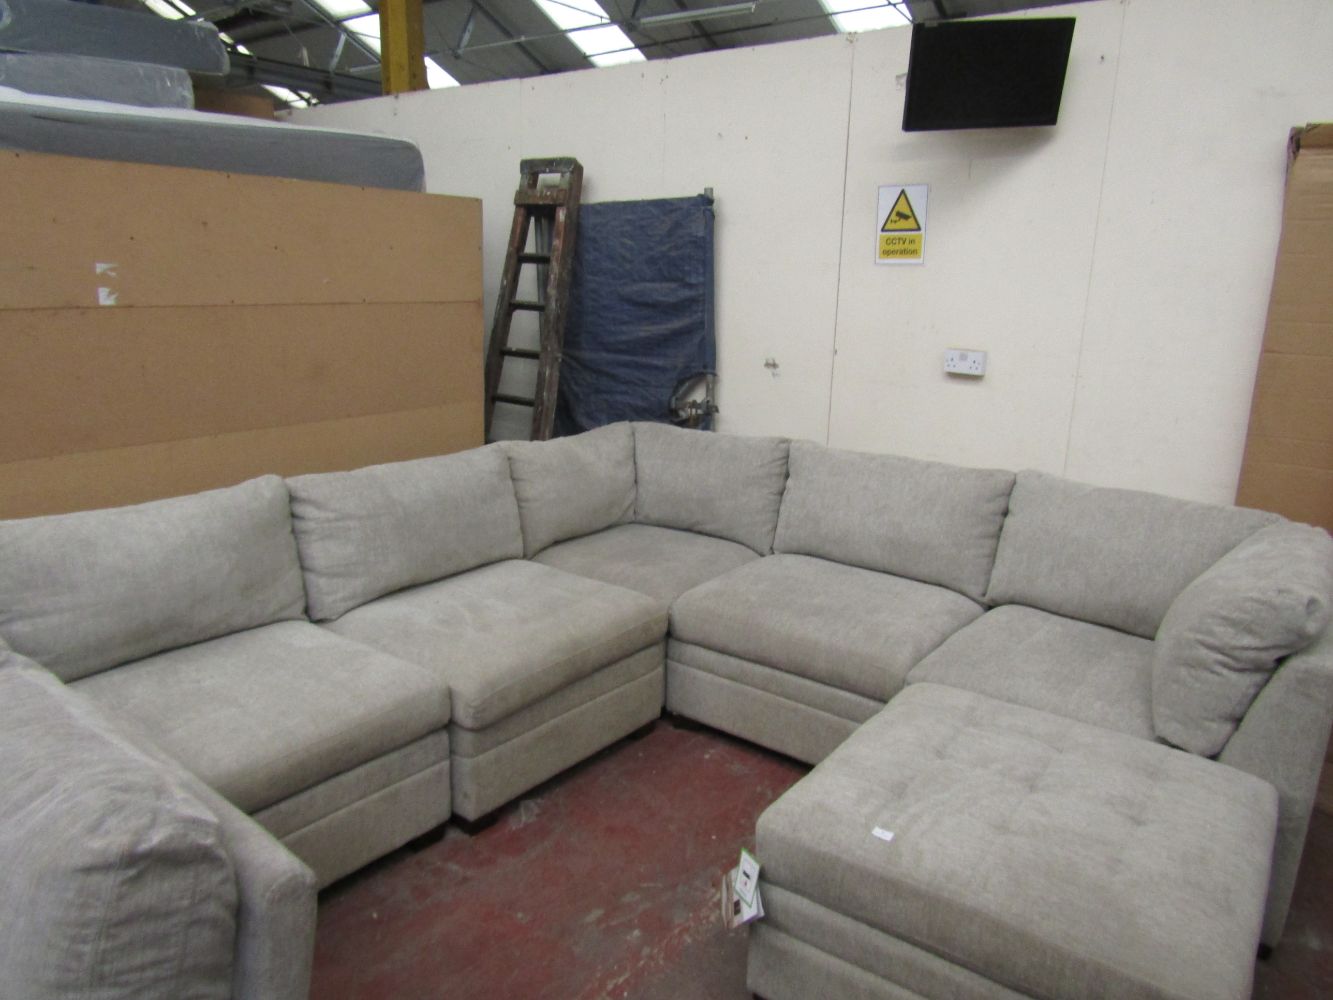 New Delivery of Costco Sofas, Made stools, Armchairs, accessories and lighting as well as a new delivery of  Ex display mattresses